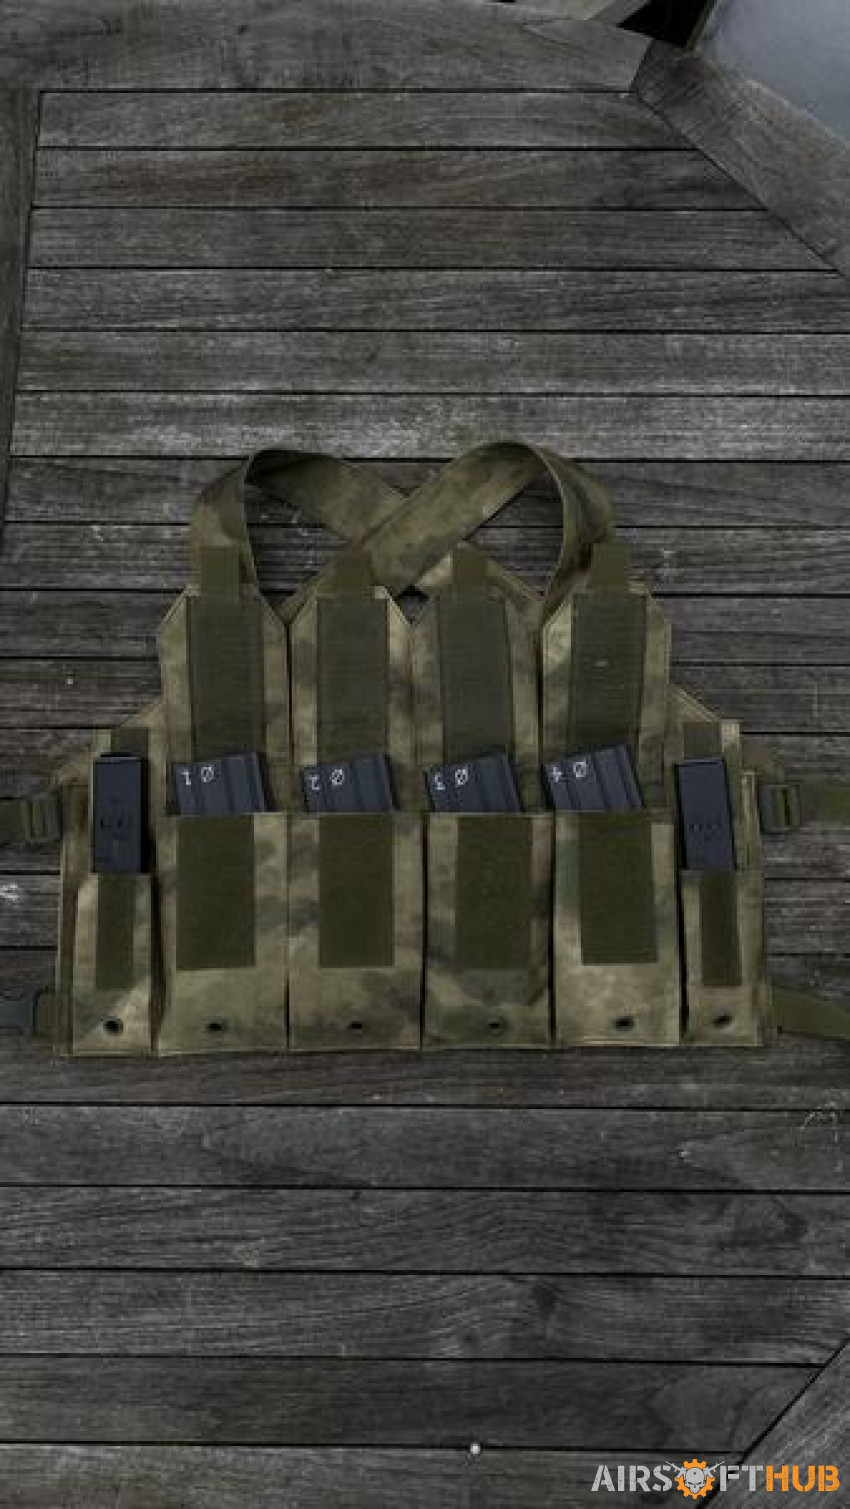 Forest green chest rig - Used airsoft equipment